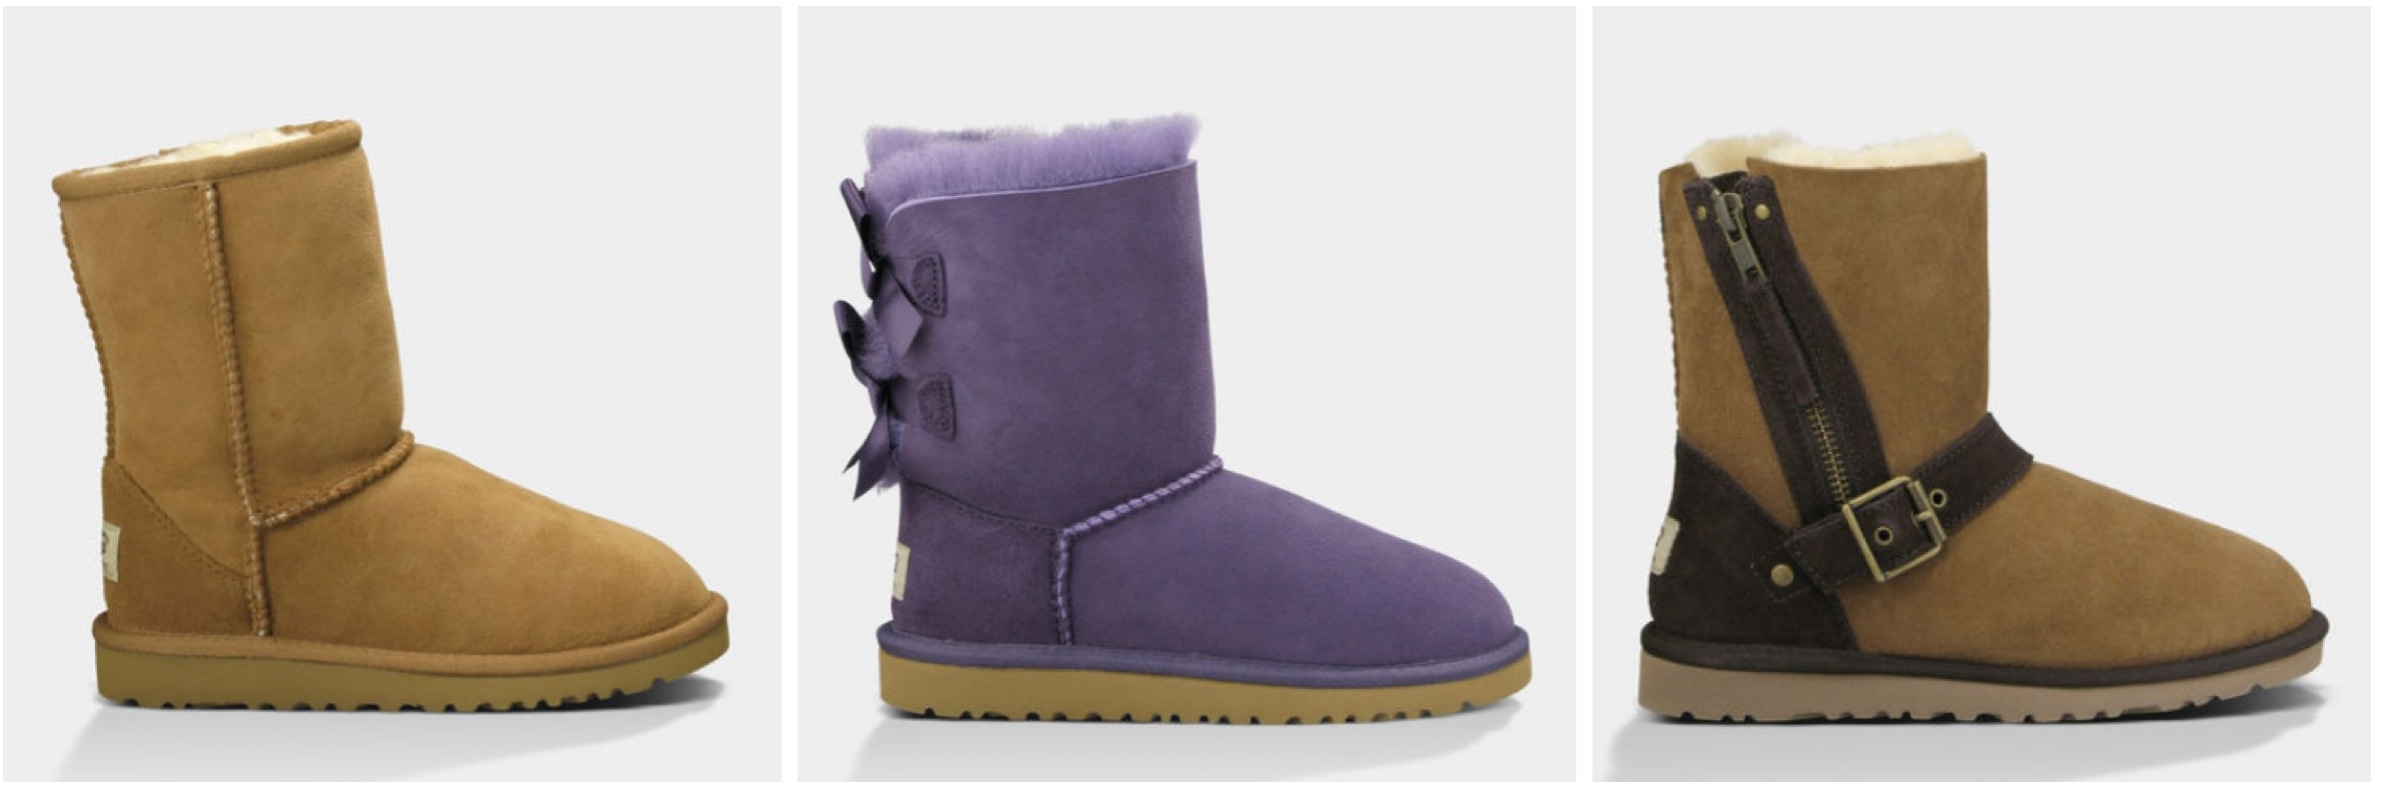 Ugg boots for adults and children 